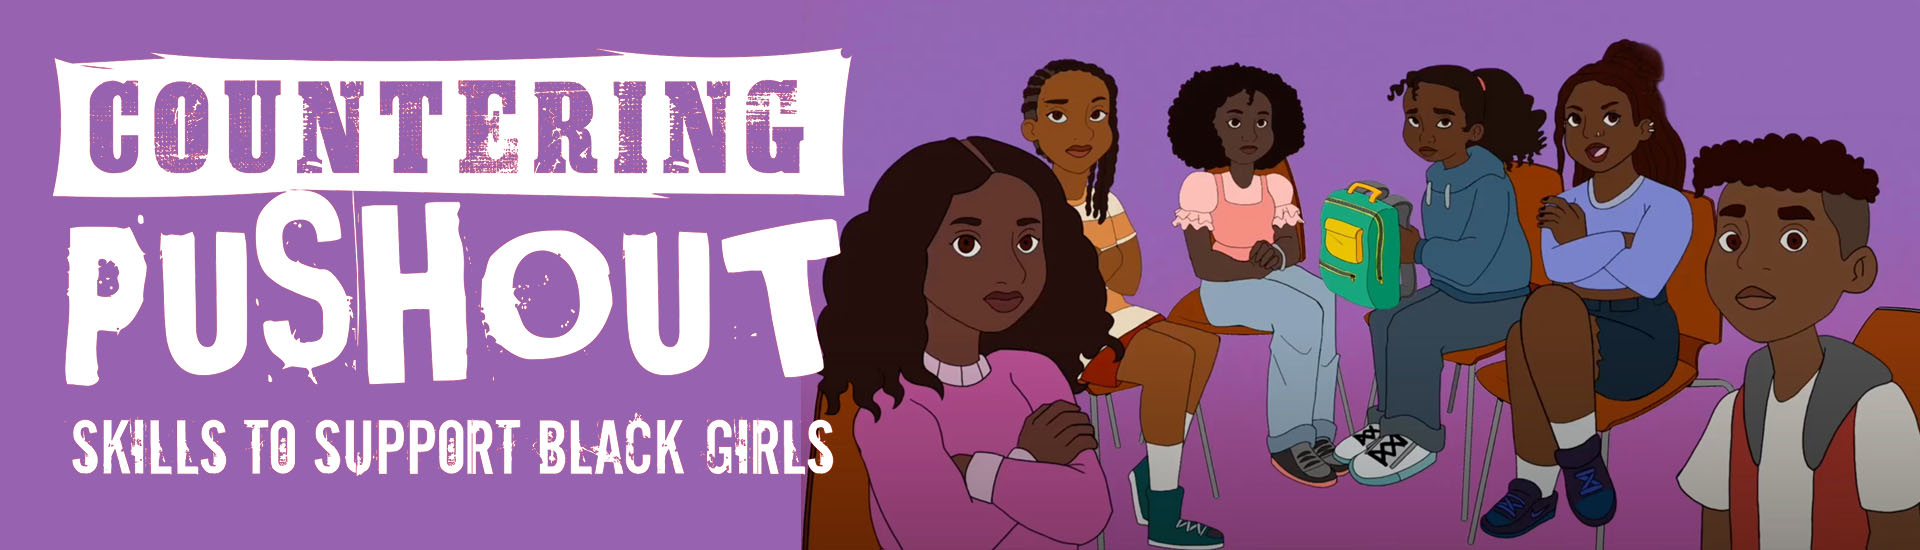 Countering Pushout: Skills to Support Black Girls